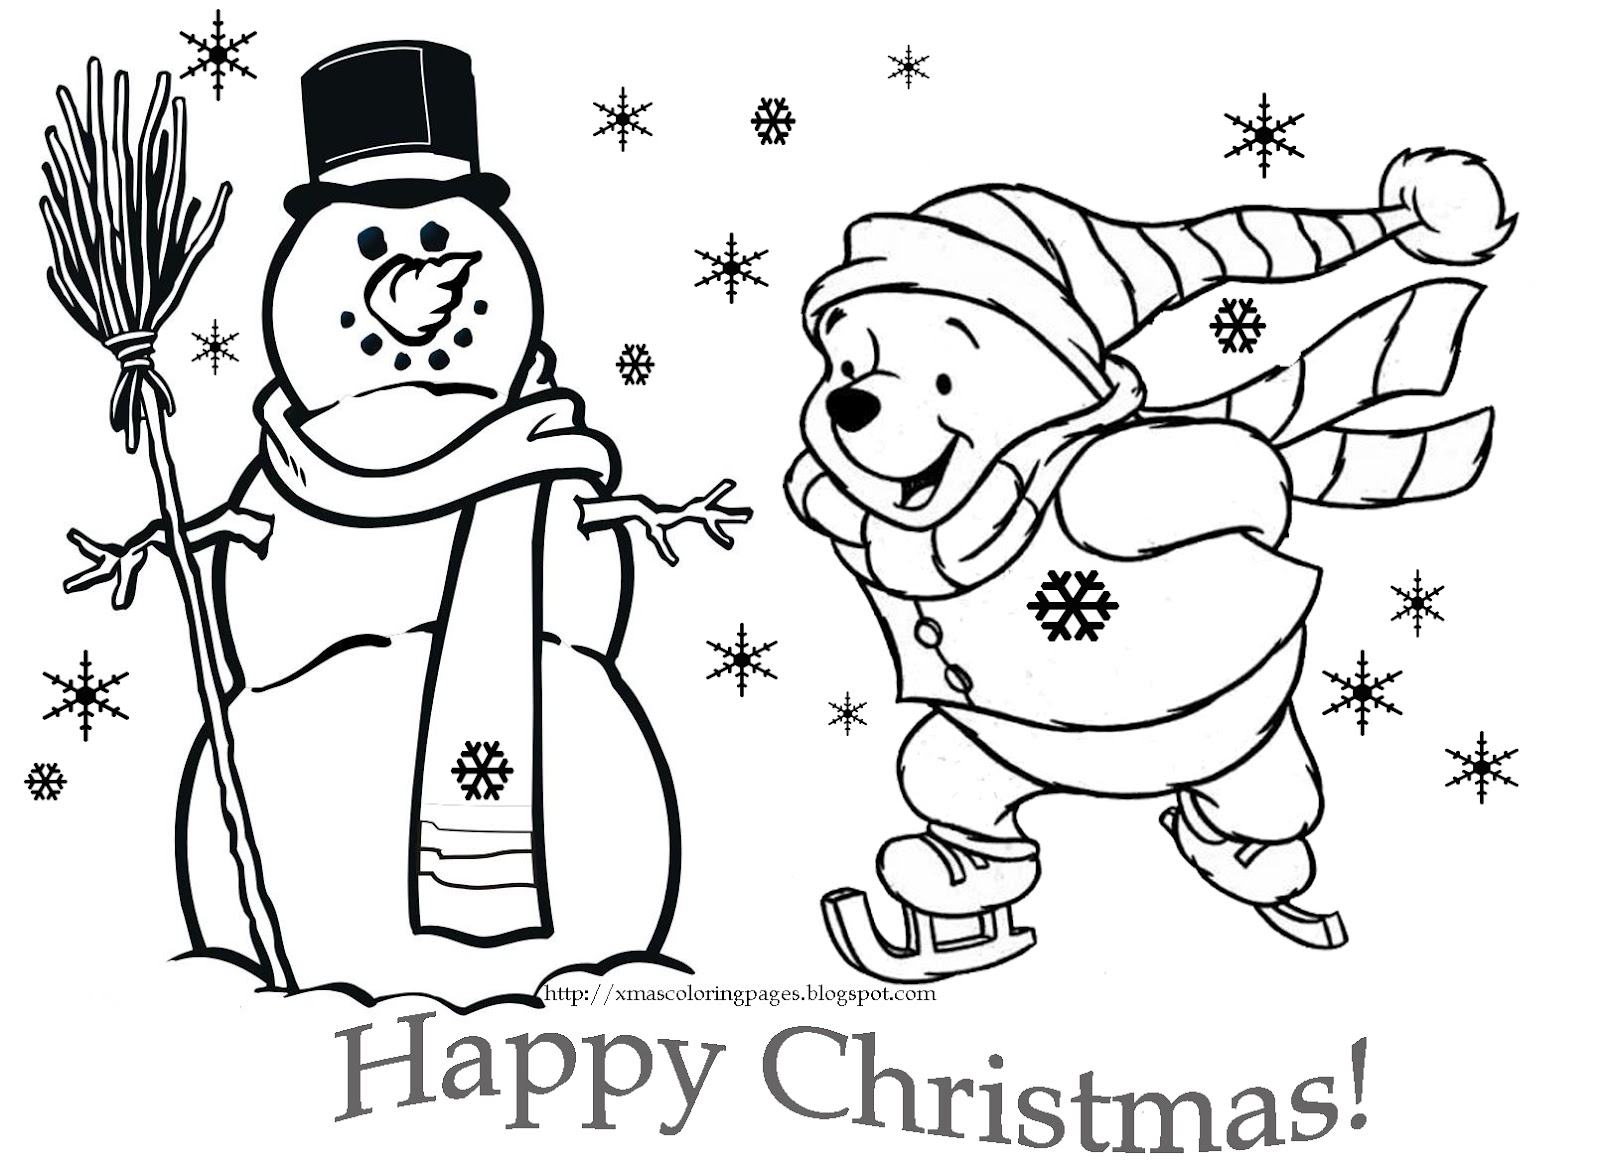 CHRISTMAS COLORING PAGES OF DISNEY CHARACTERS